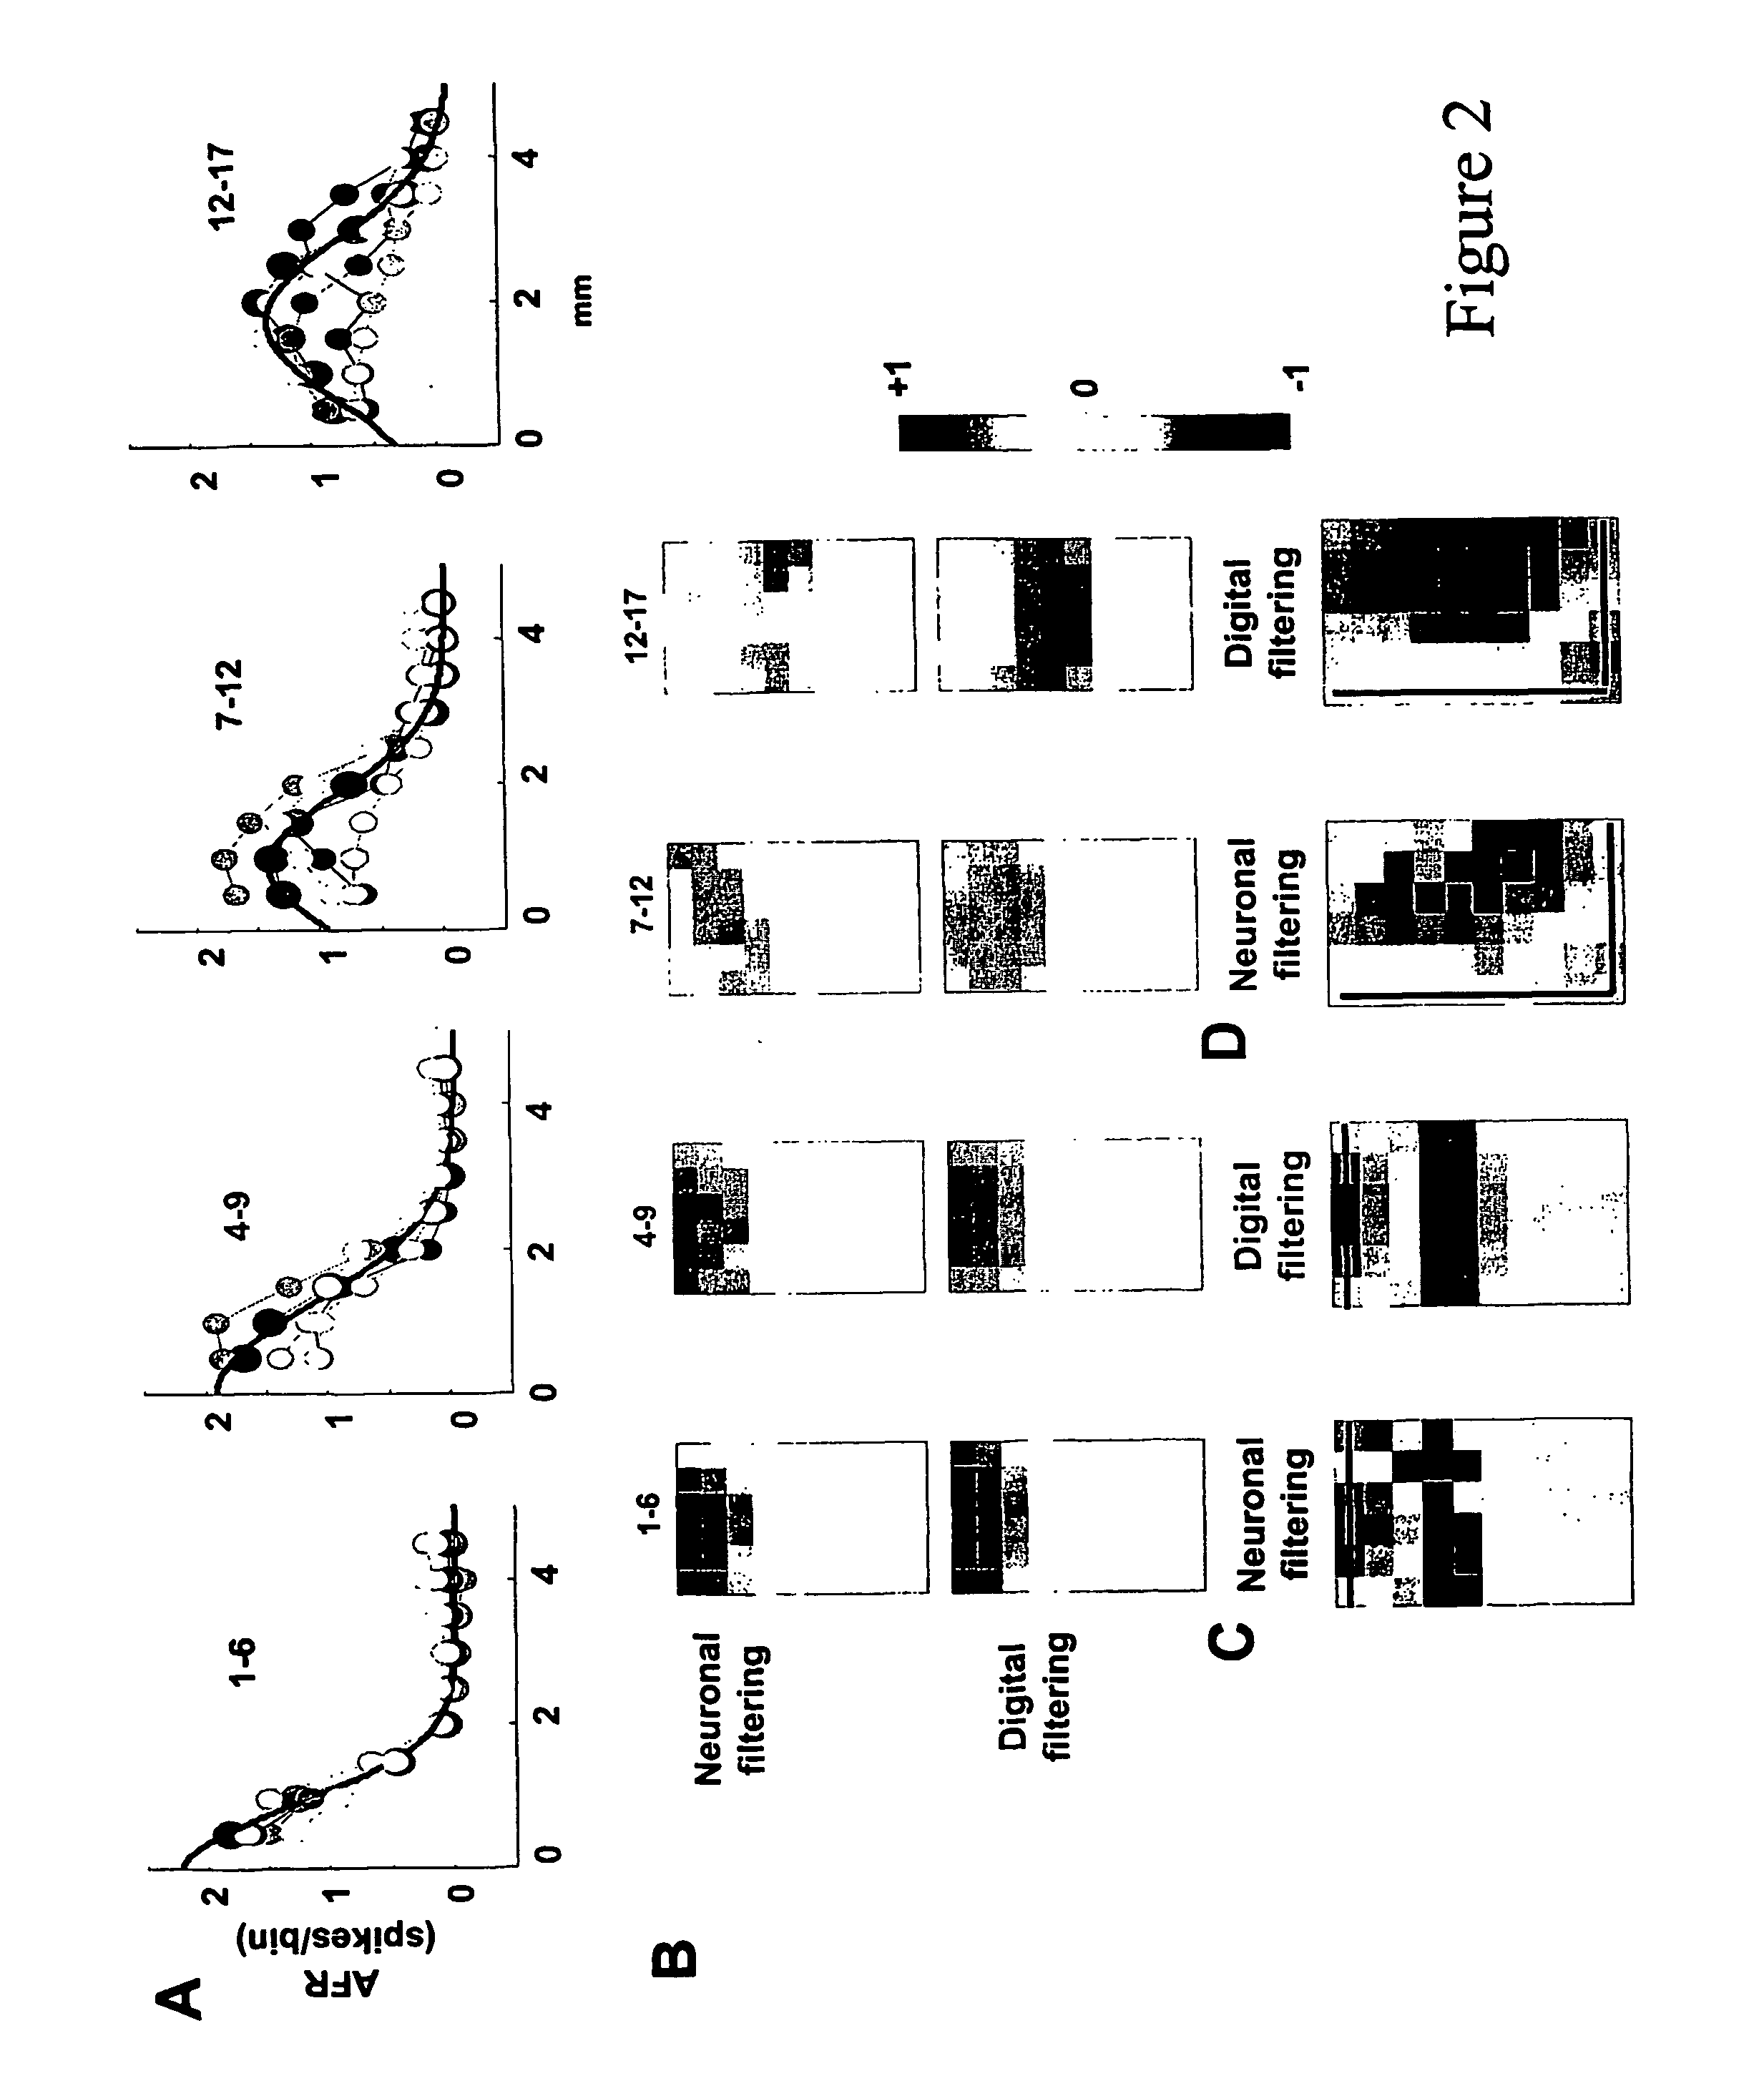 Method and device for image processing and learning with neuronal cultures